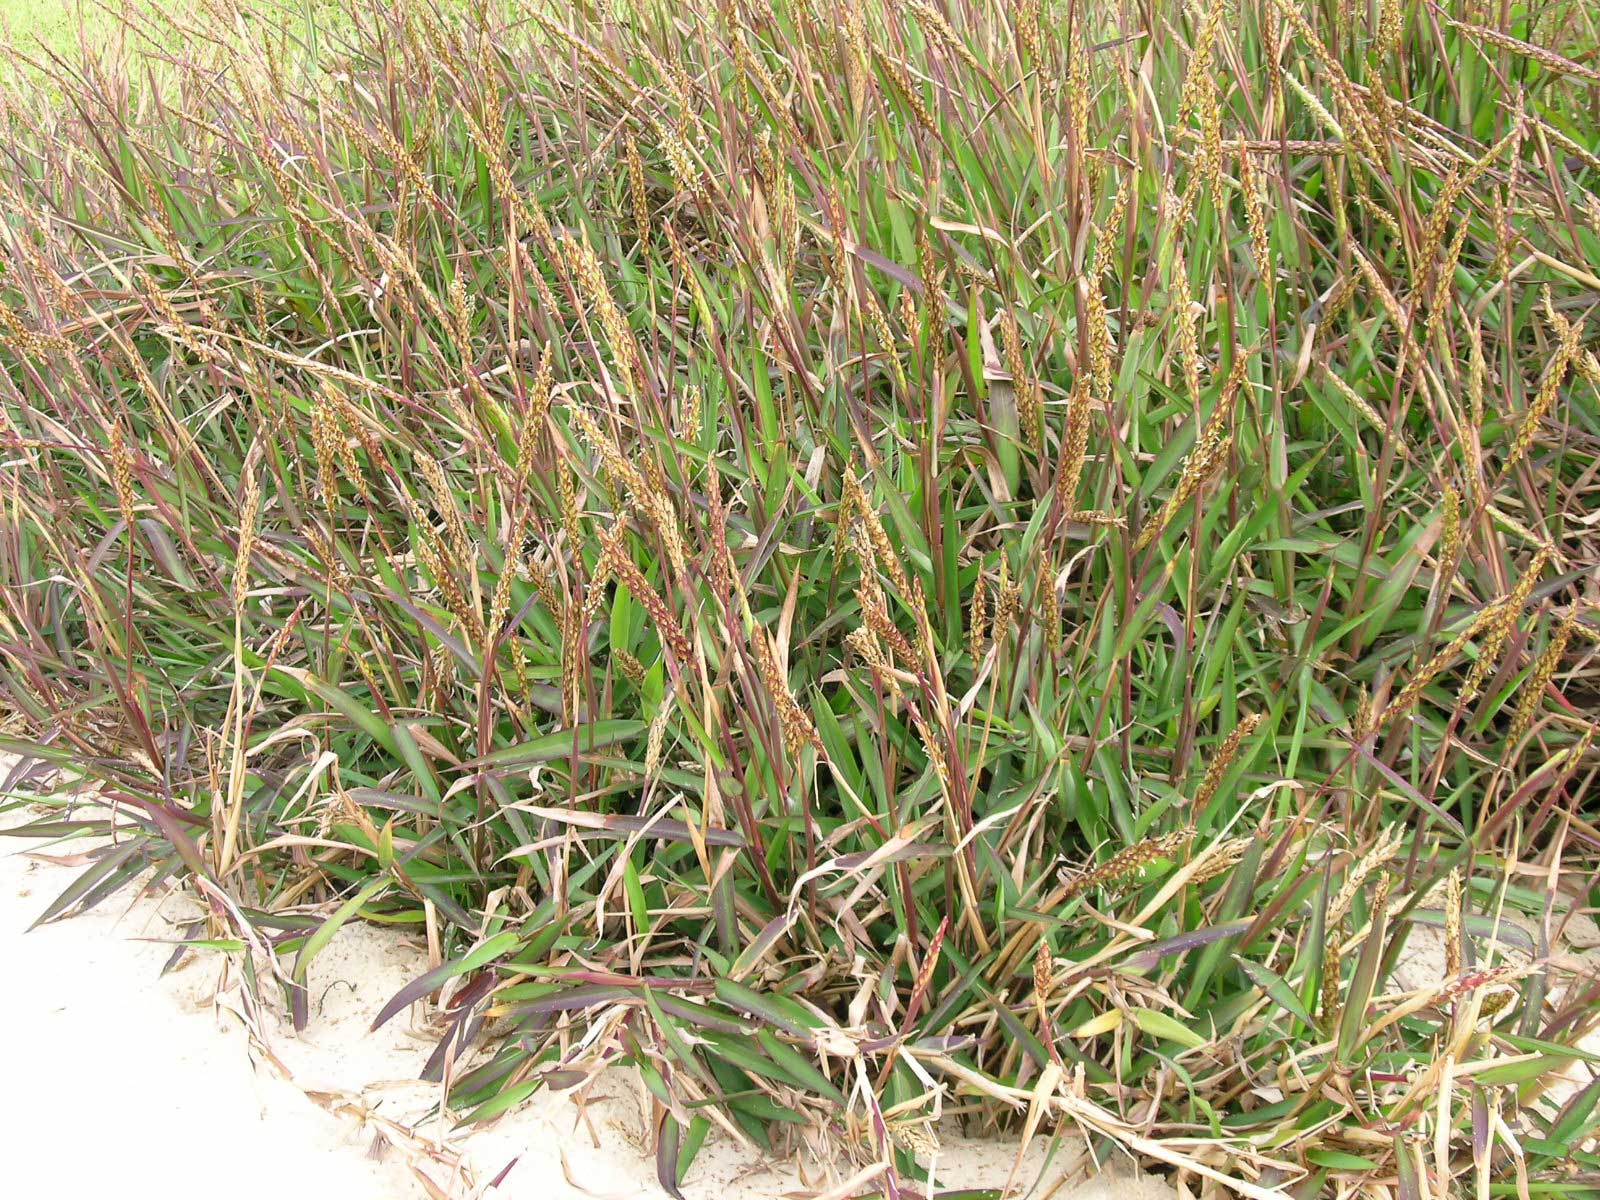 Photograph of Ischaemum triticeum, a type of murainagrass, growing on a sandy beach. The photo shows a tangle of green grass, dry yellow grass leaves, and flowering stalks.